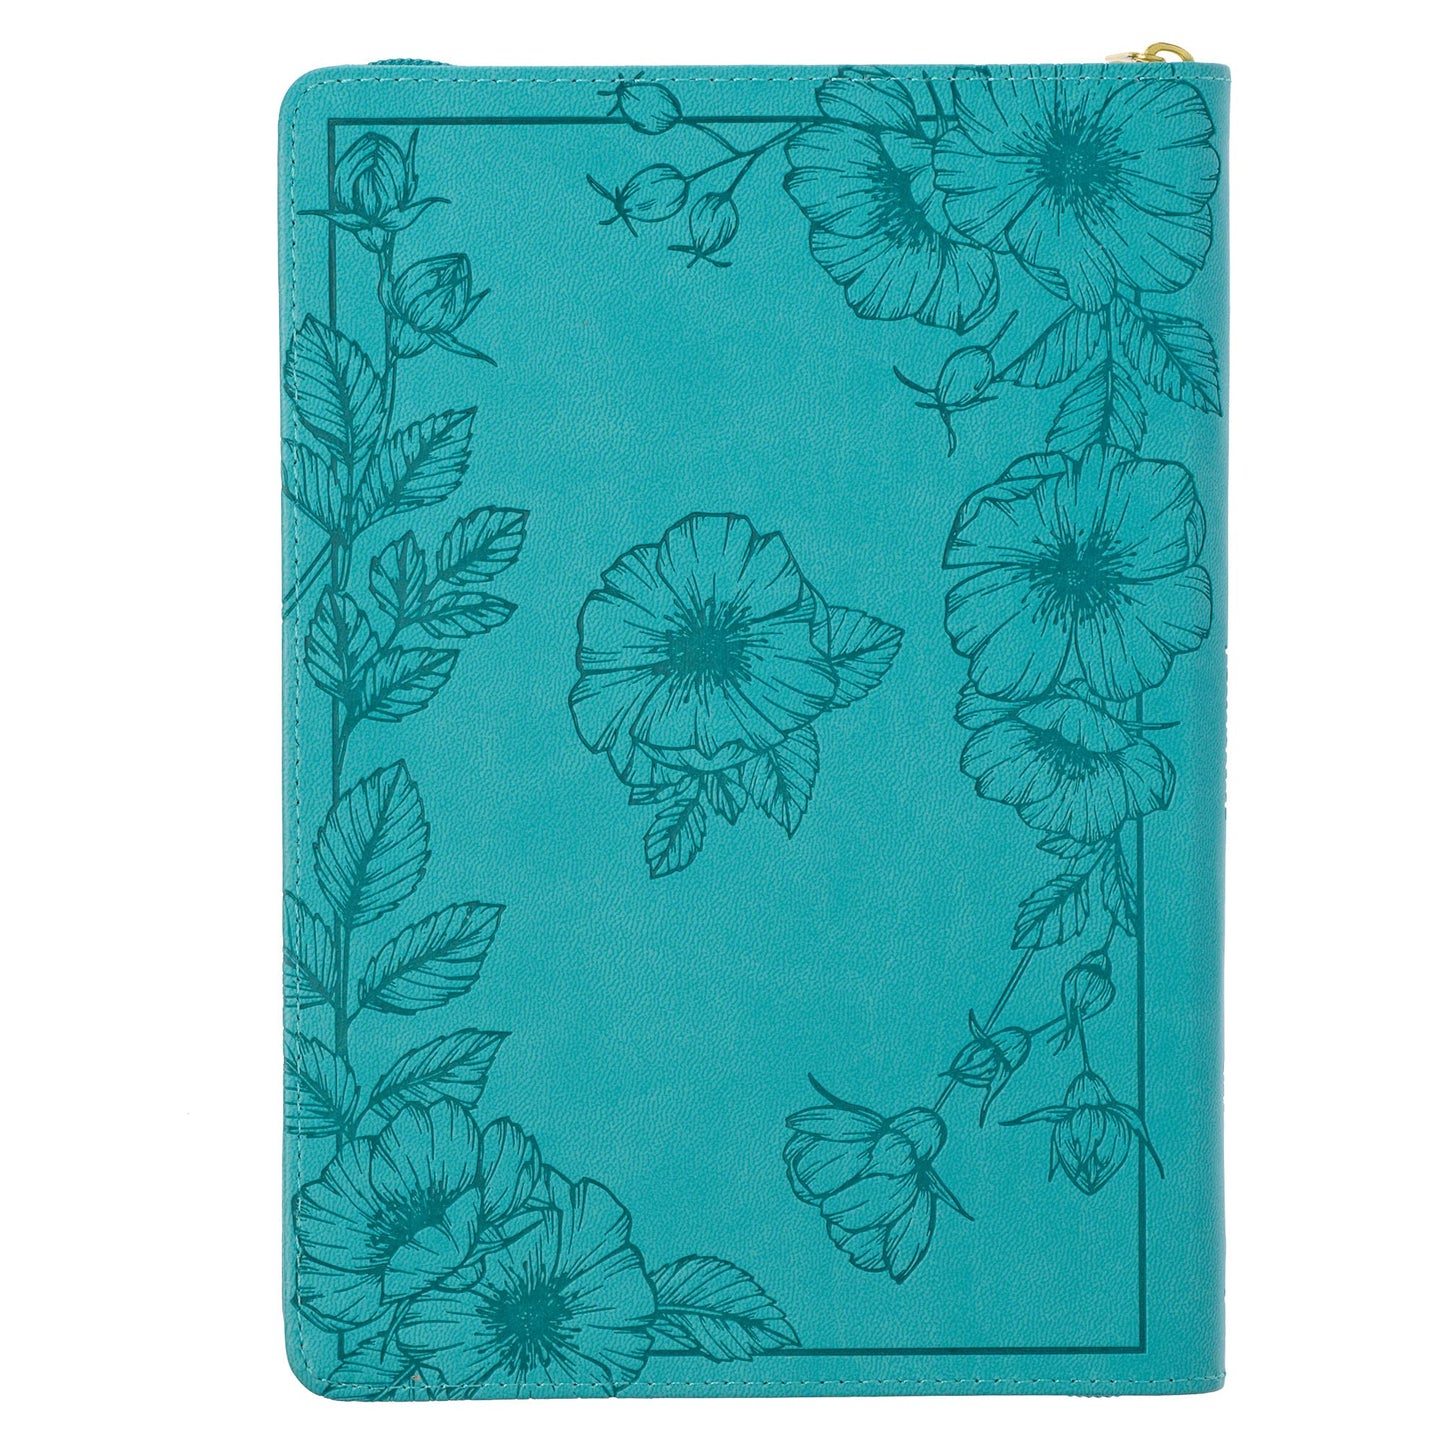 Strength & Dignity Proverbs 31:25 Bible Verse Teal Floral Inspirational